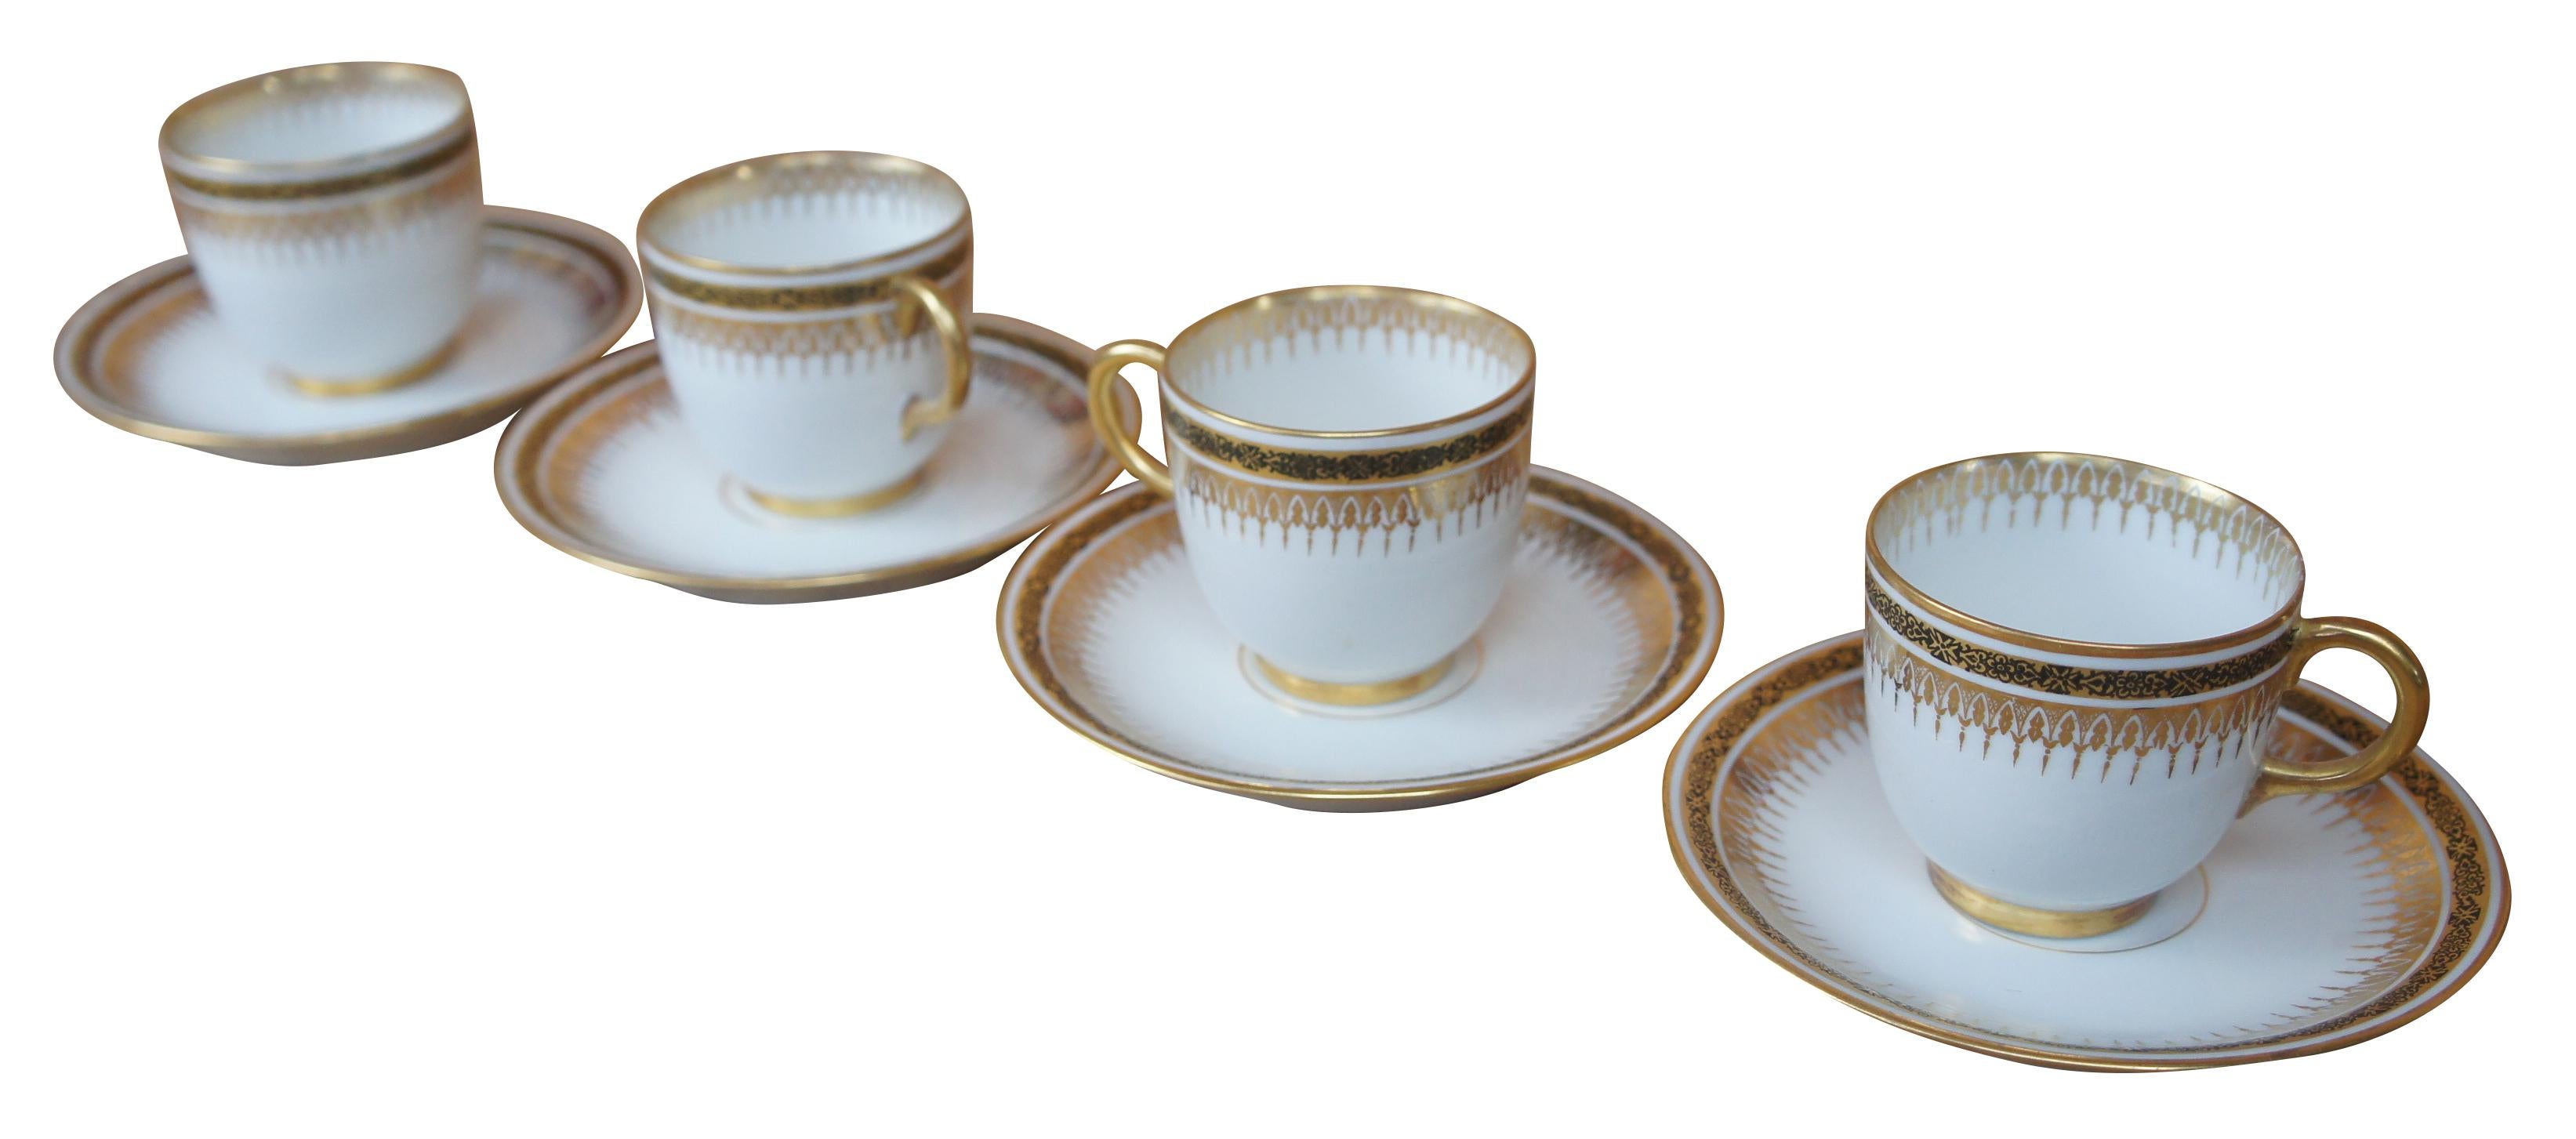 French Provincial 4 Antique French Pouyat Limoges Ivory Gold Demitasse Tea Coffee Cups Saucers